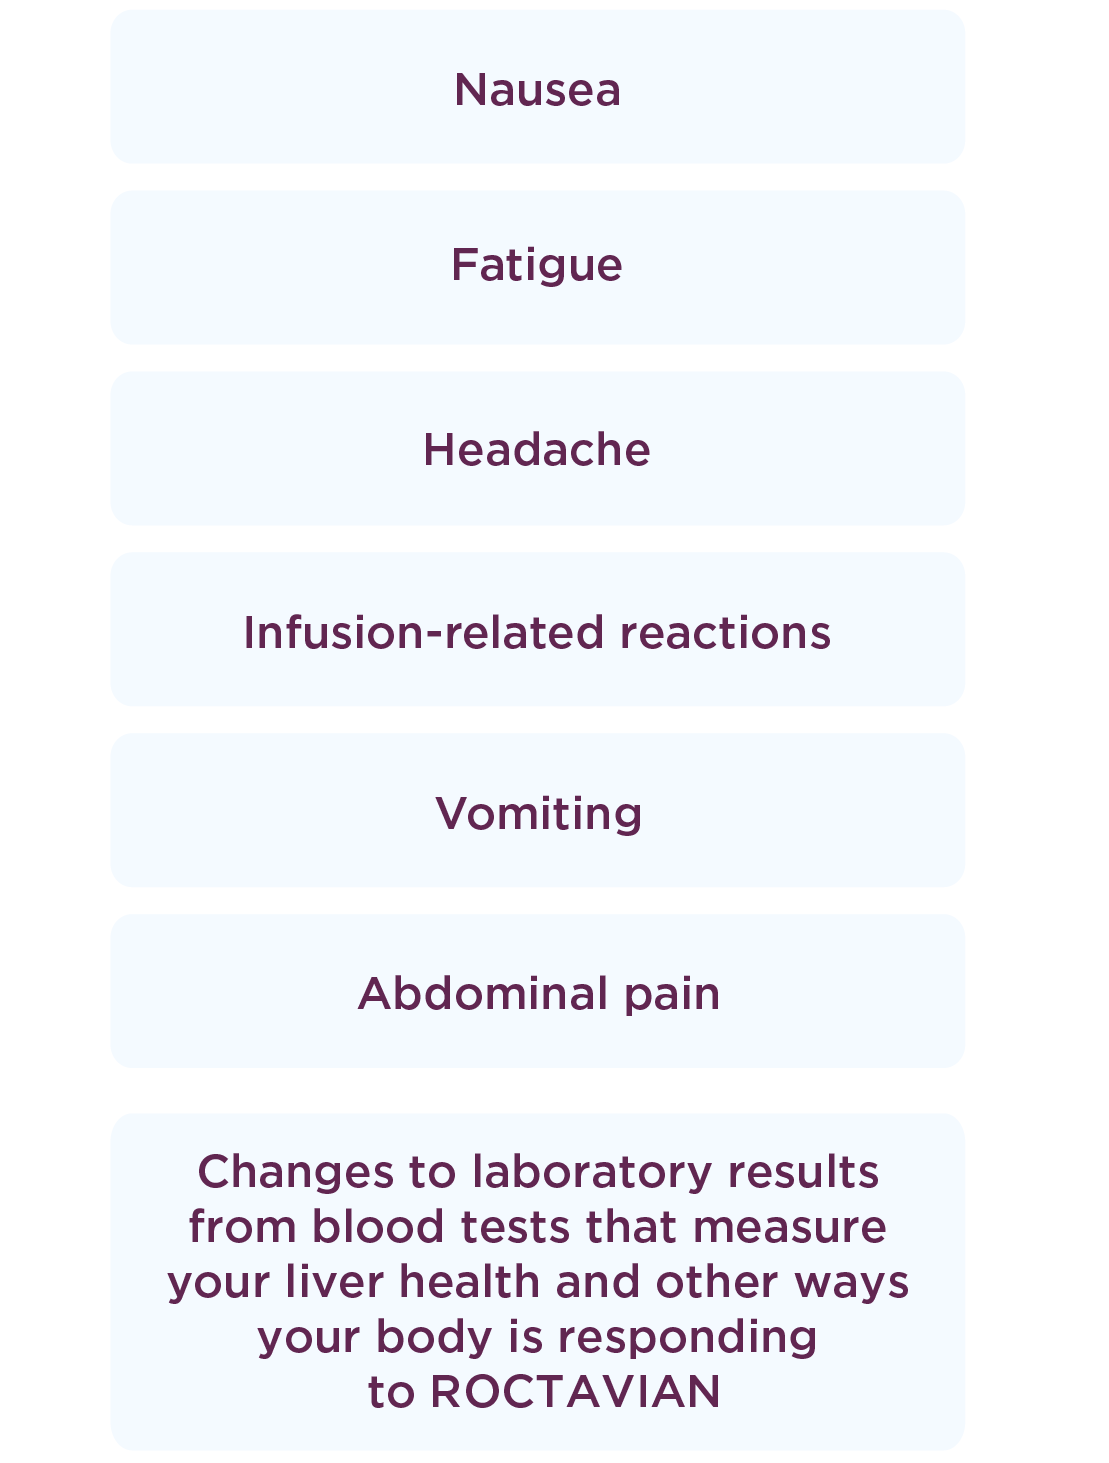 Chart of the most common side effects of ROCTAVIAN, including nausea, fatigue, headache, infusion-related reactions, vomiting, abdominal pain, and changes to laboratory results from blood tests that measure your liver health and other ways your body is responding to ROCTAVIAN.